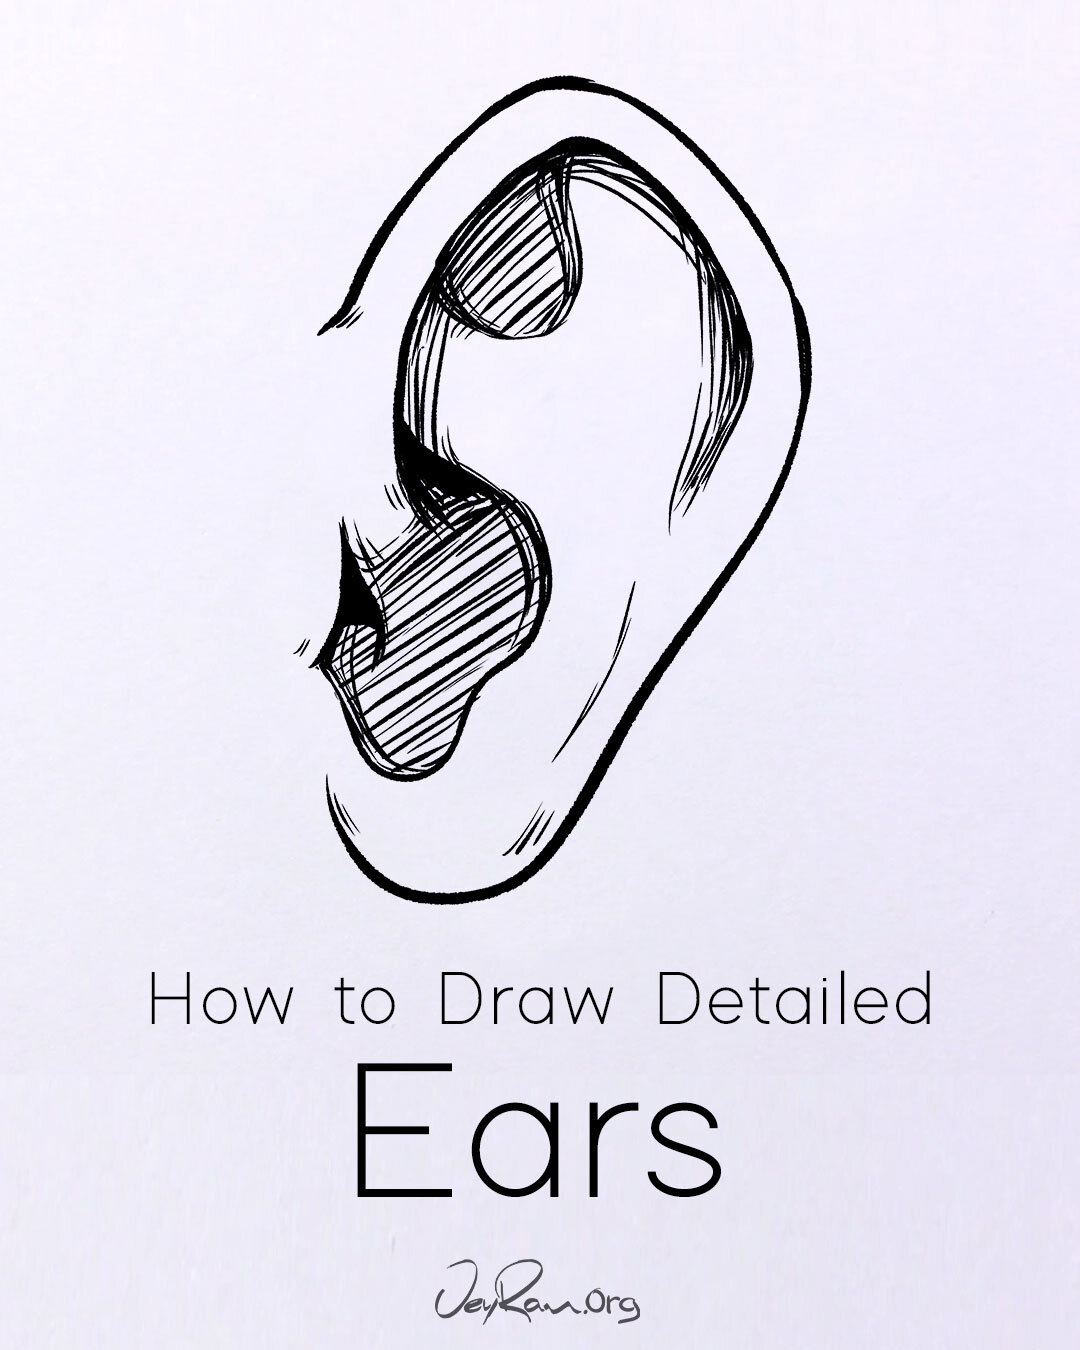 How to Draw Ears, Printable Workbook by JeyRam #art #drawing #tutorial